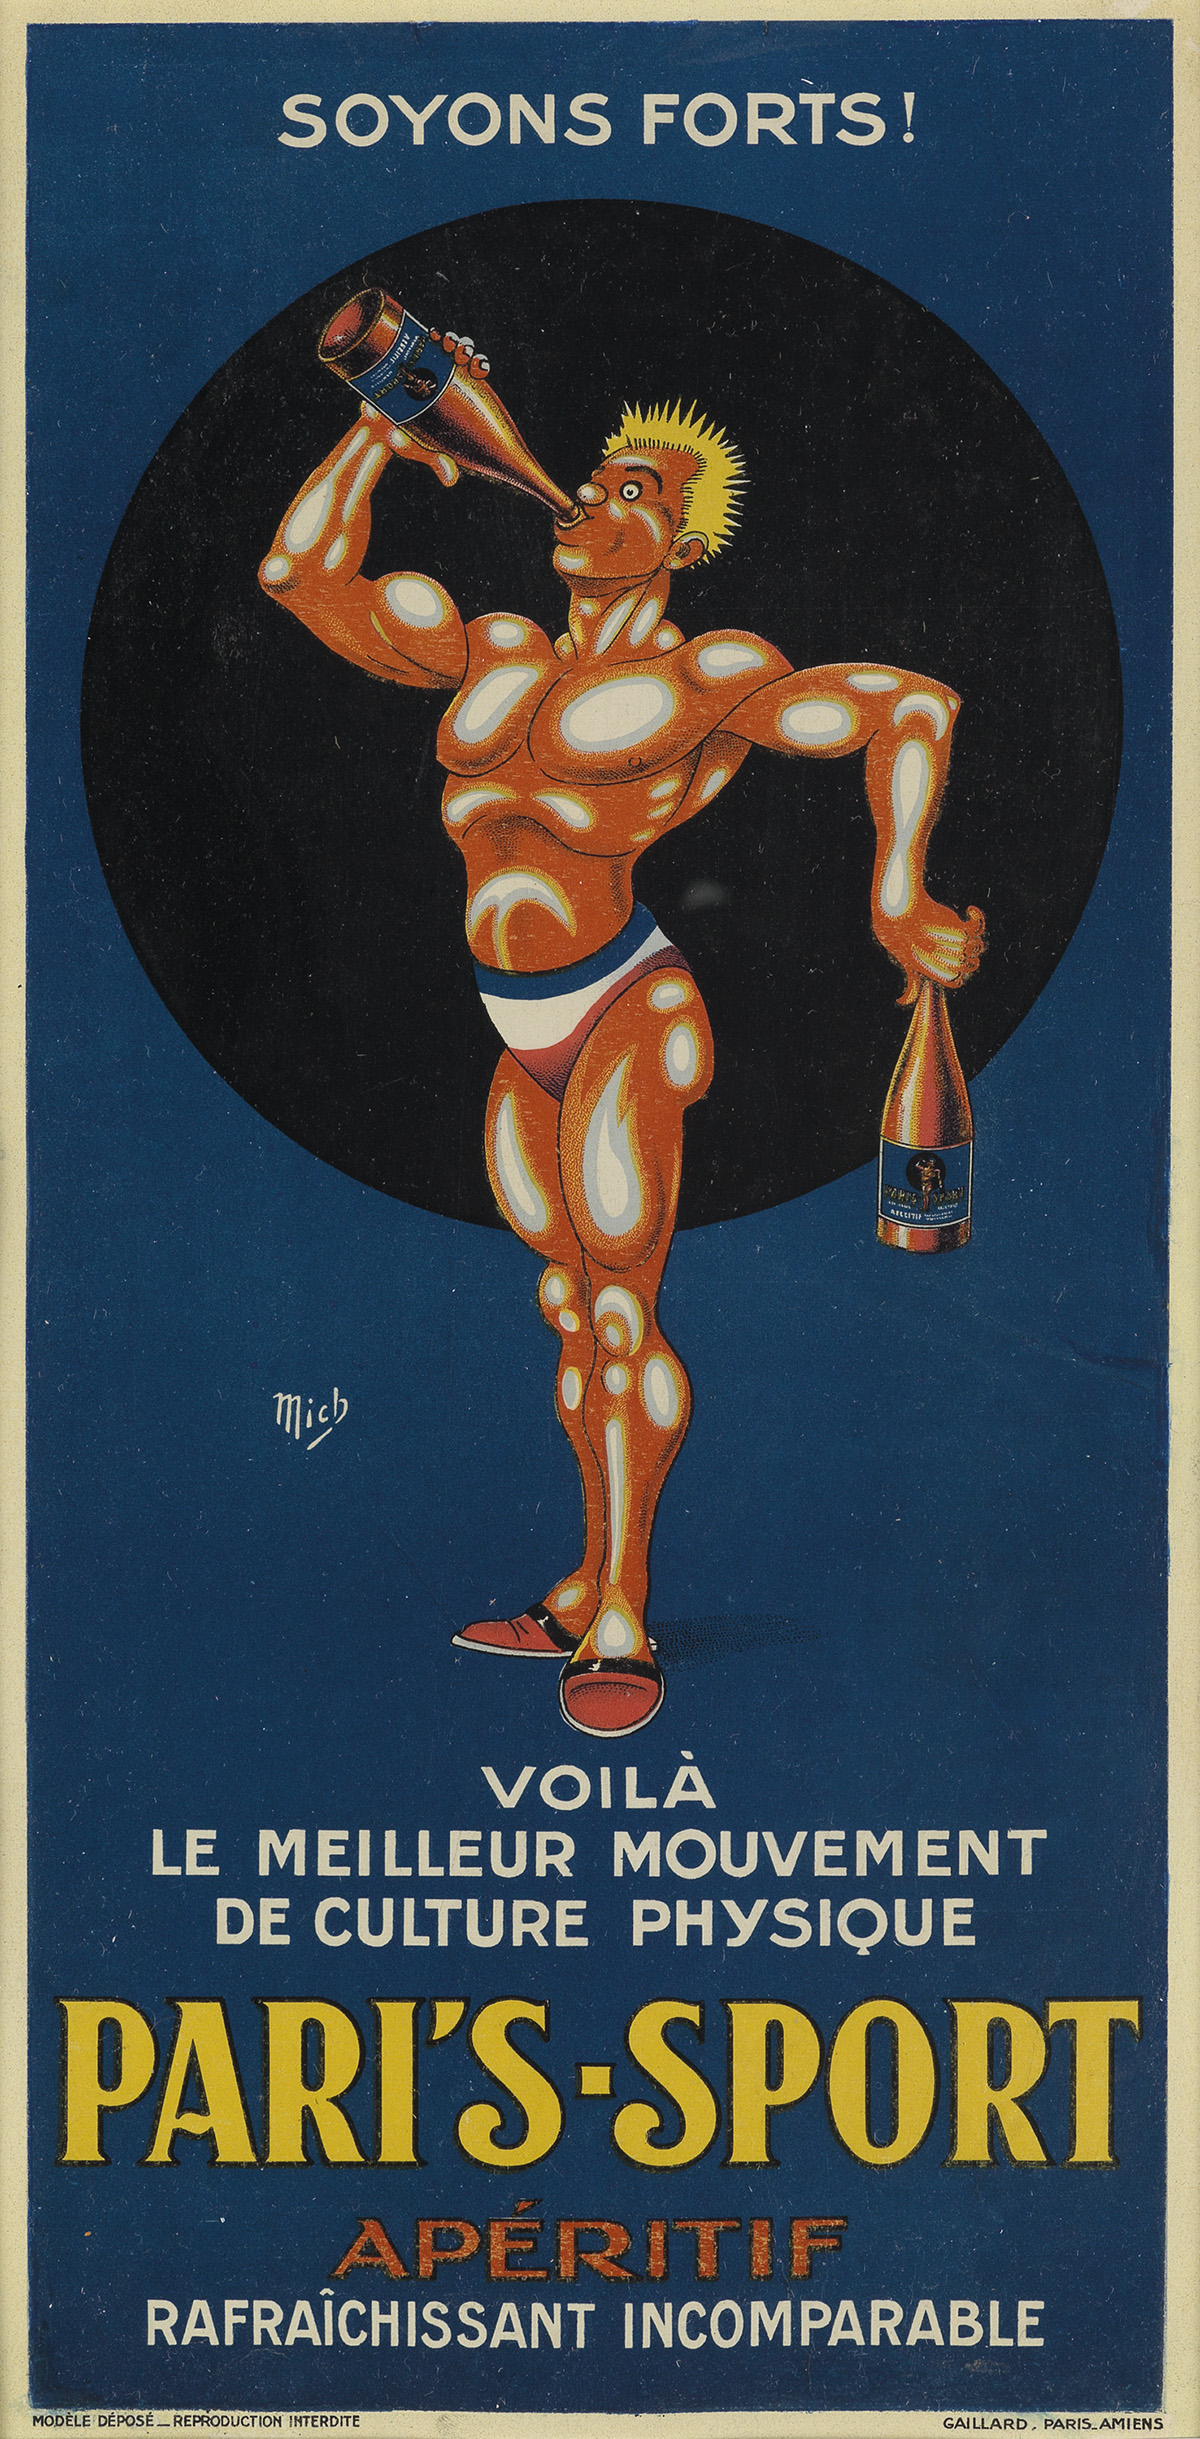 Prints of Advertising for Louis Vuitton by Mich (Michel Liebeaux, 1881-1923)